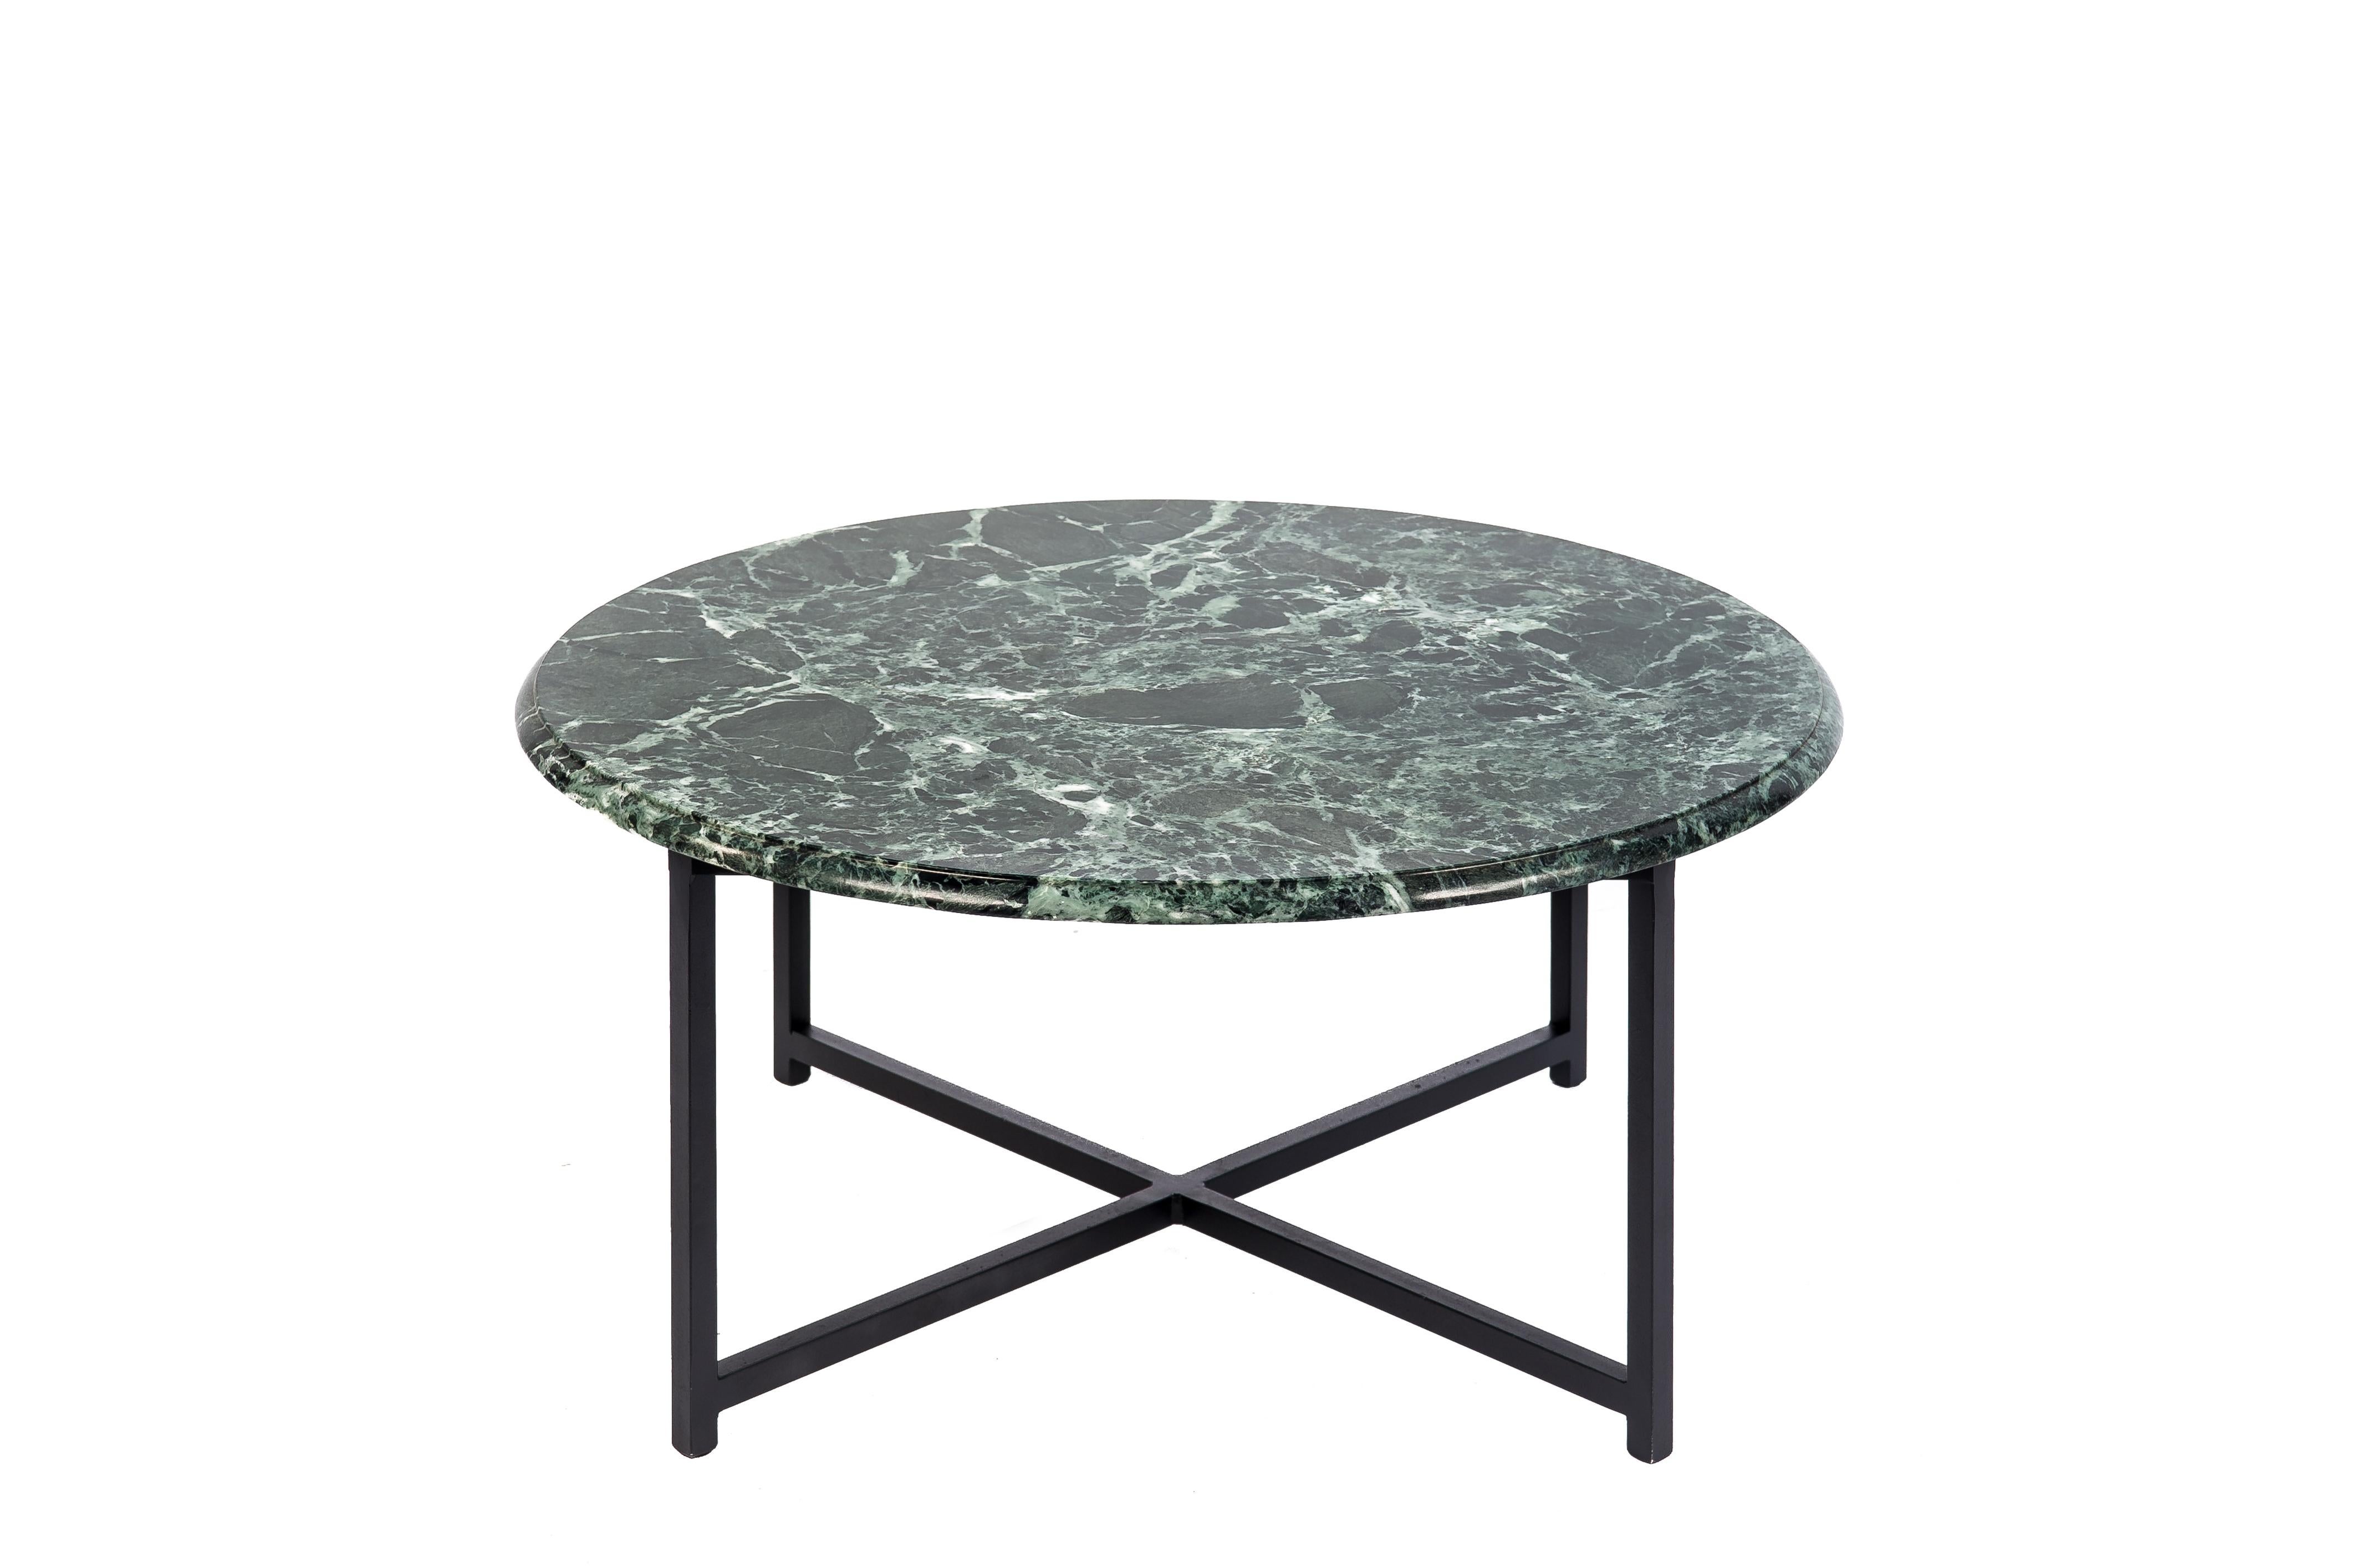 A beautiful combination of a circular marble top with a steel base. The black and green-veined marble top have a molded edge and an intricate vein pattern. The marble top was polished to a high degree of gloss and contrasts well with the matte black